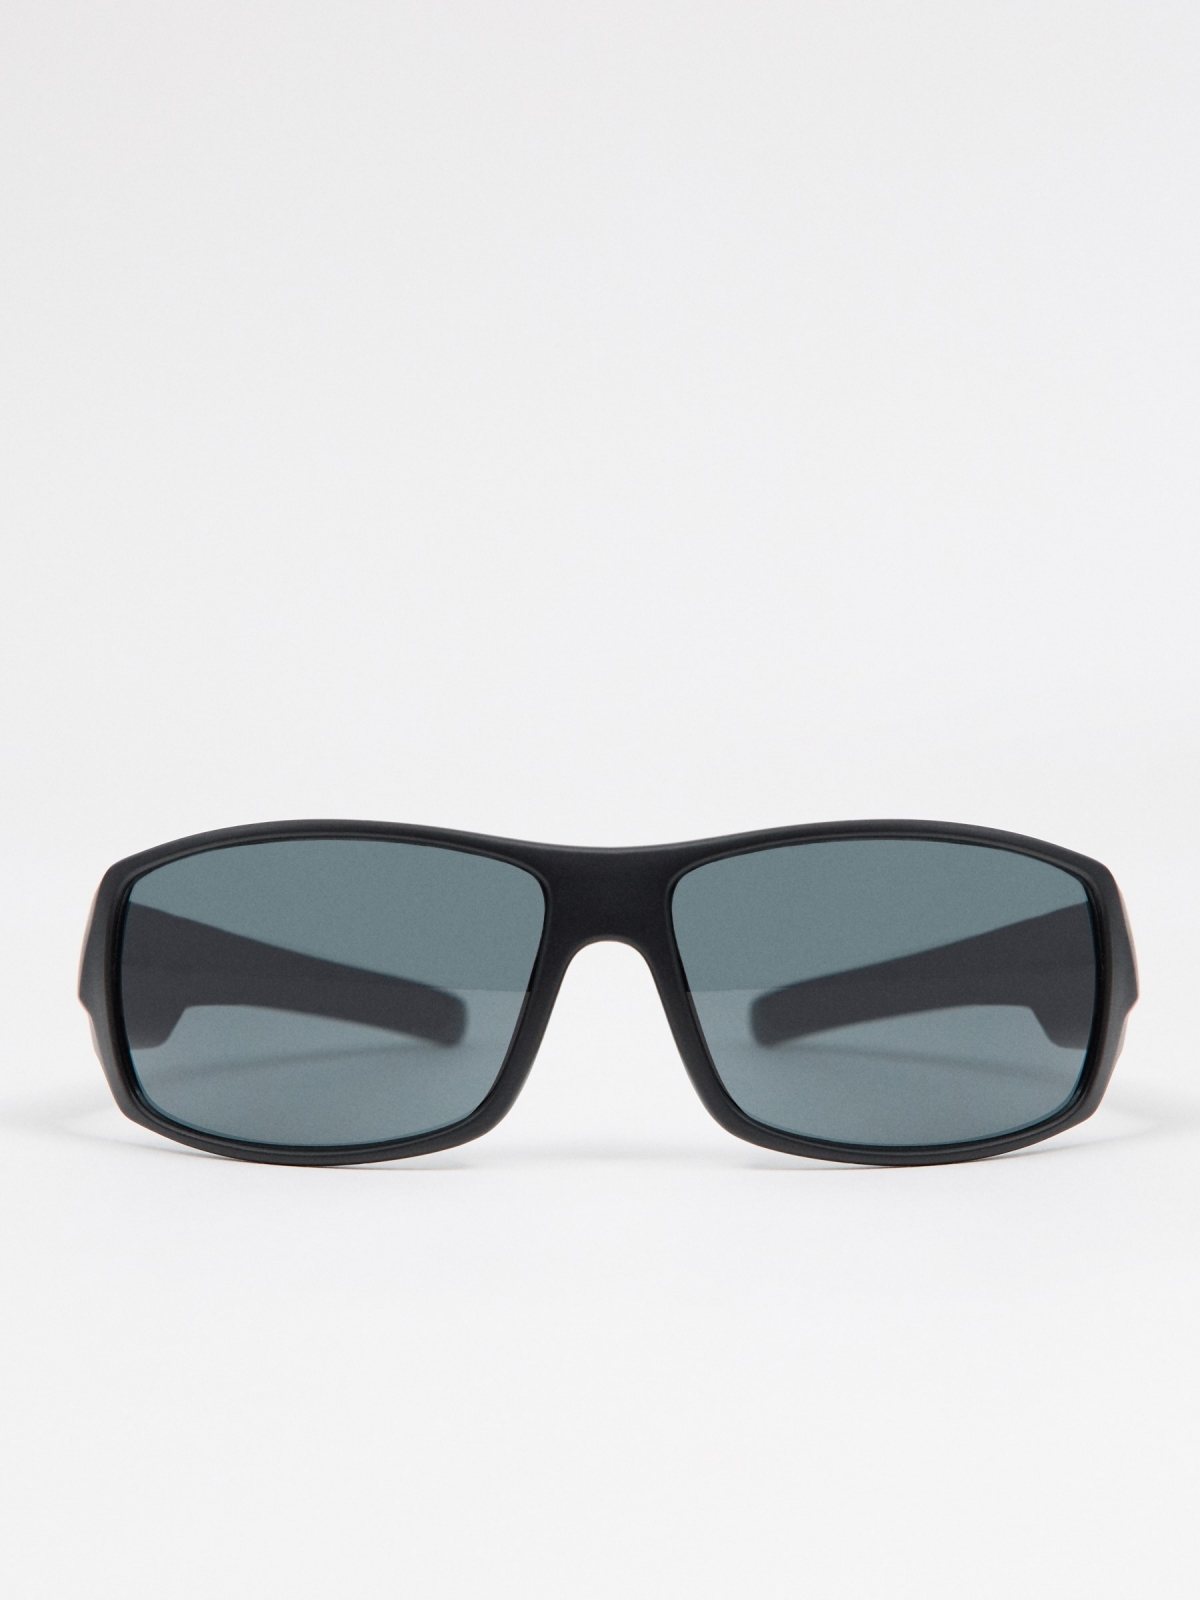 Sunglasses with frame black